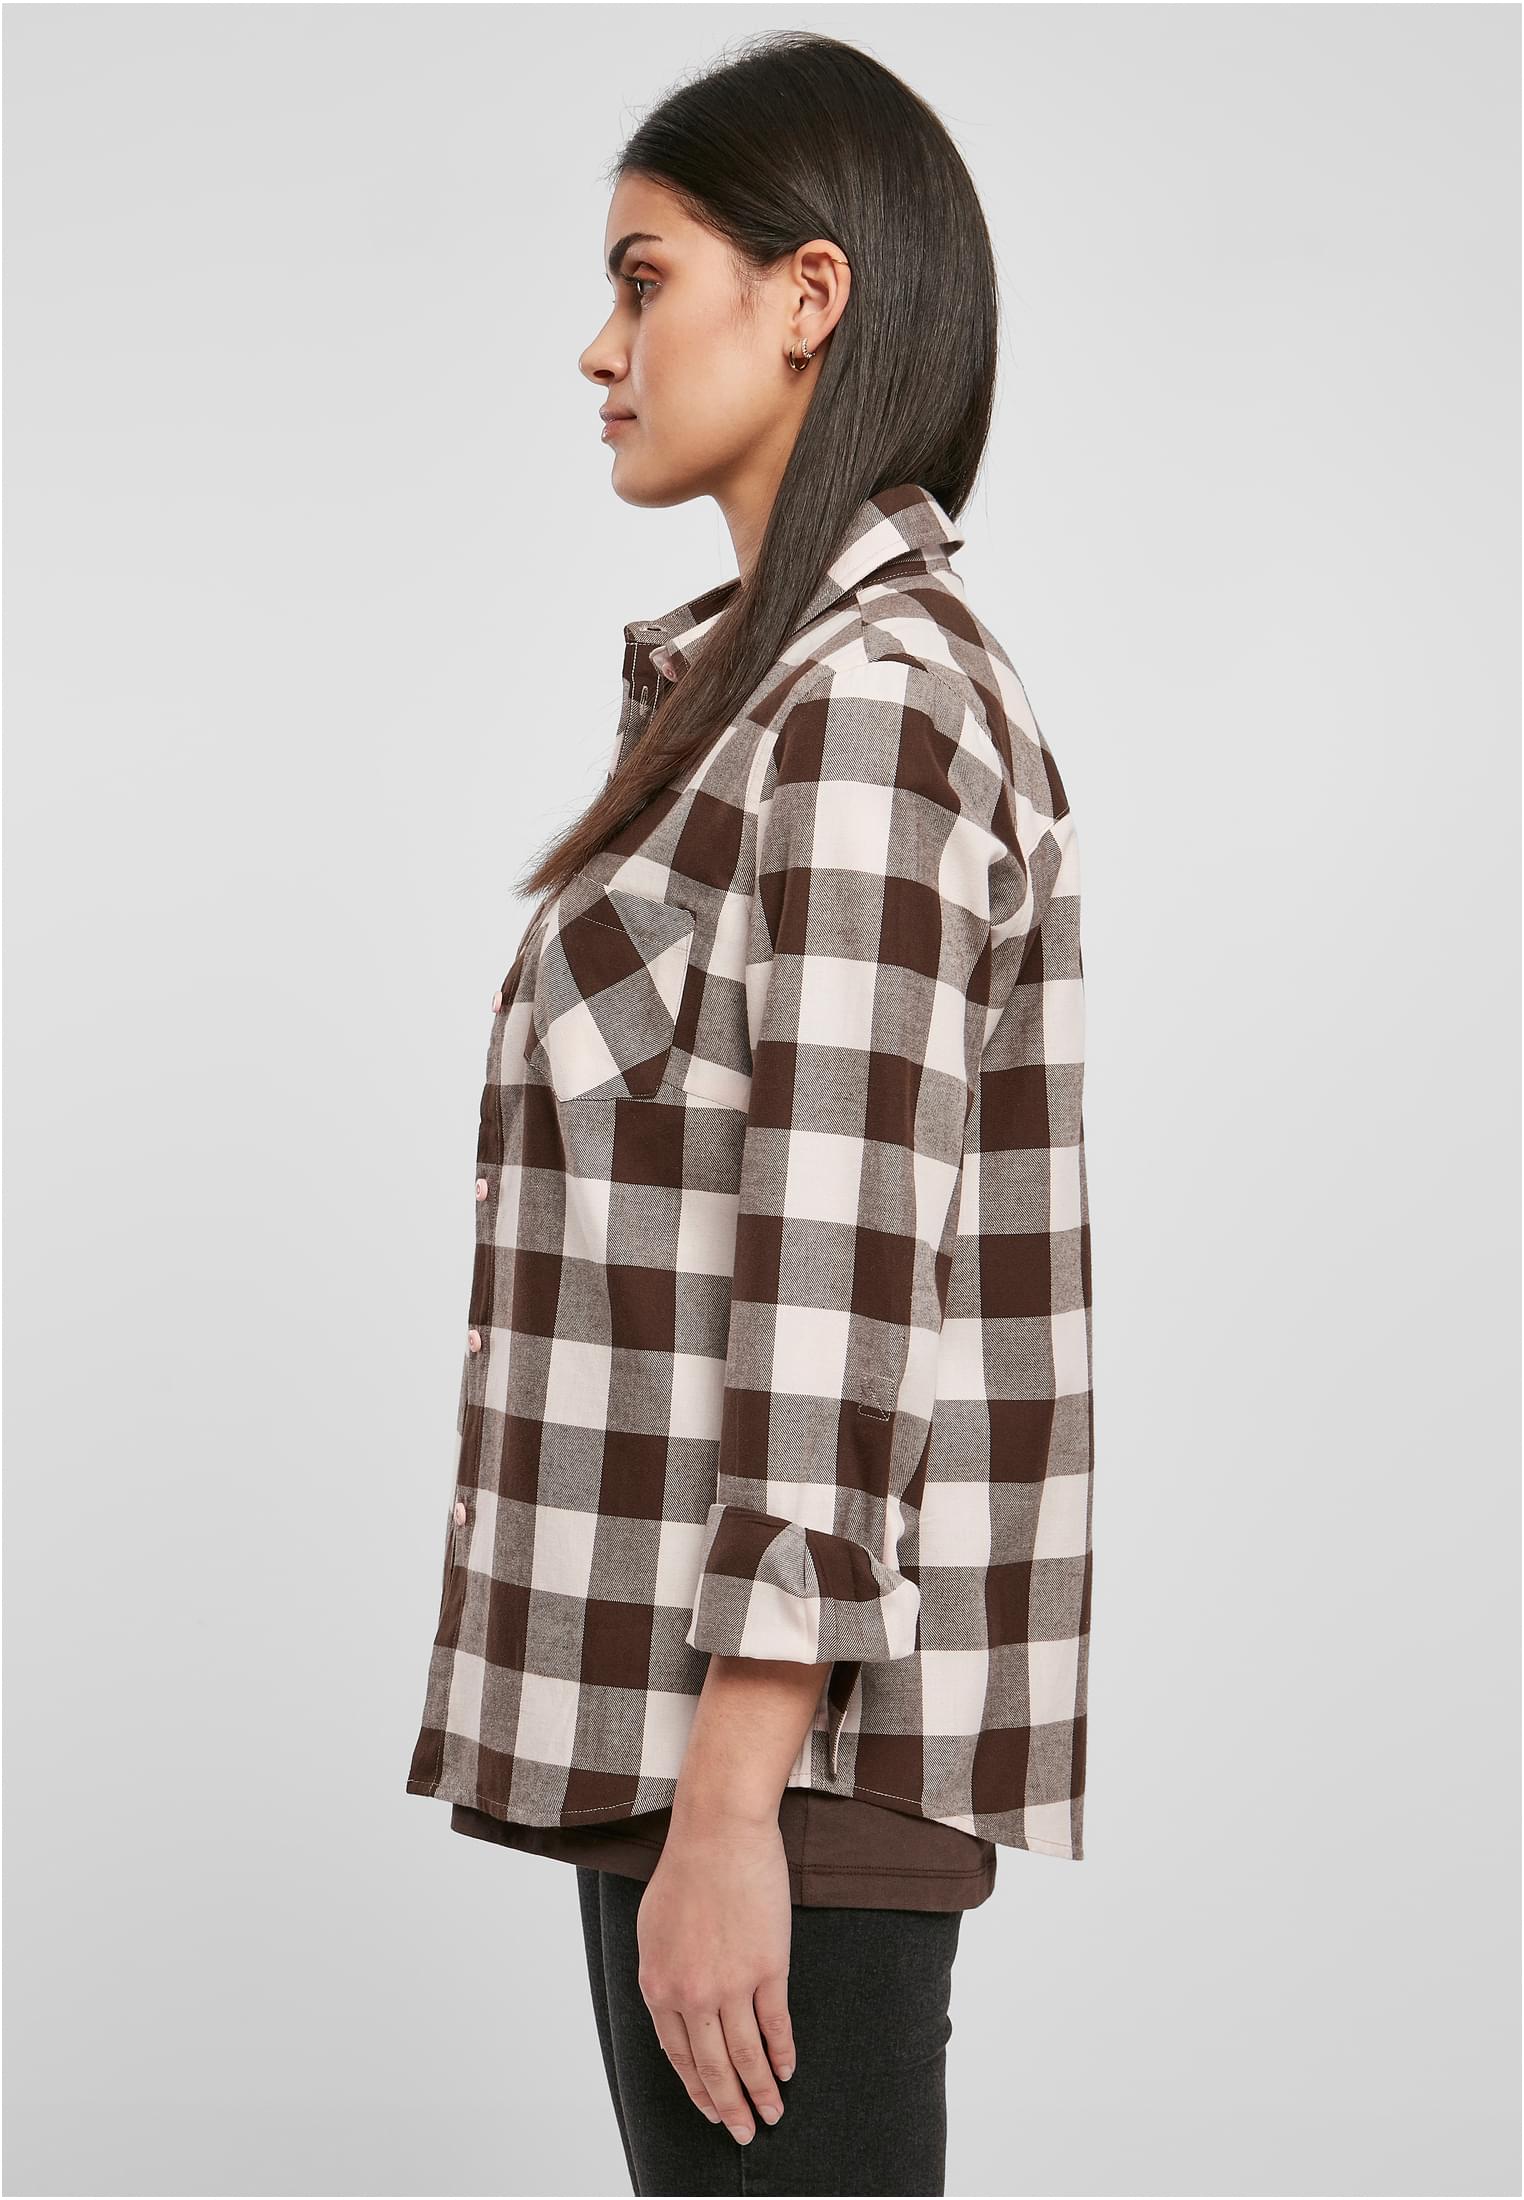 Damen Ladies Turnup Checked Flanell Shirt in Farbe pink/brown